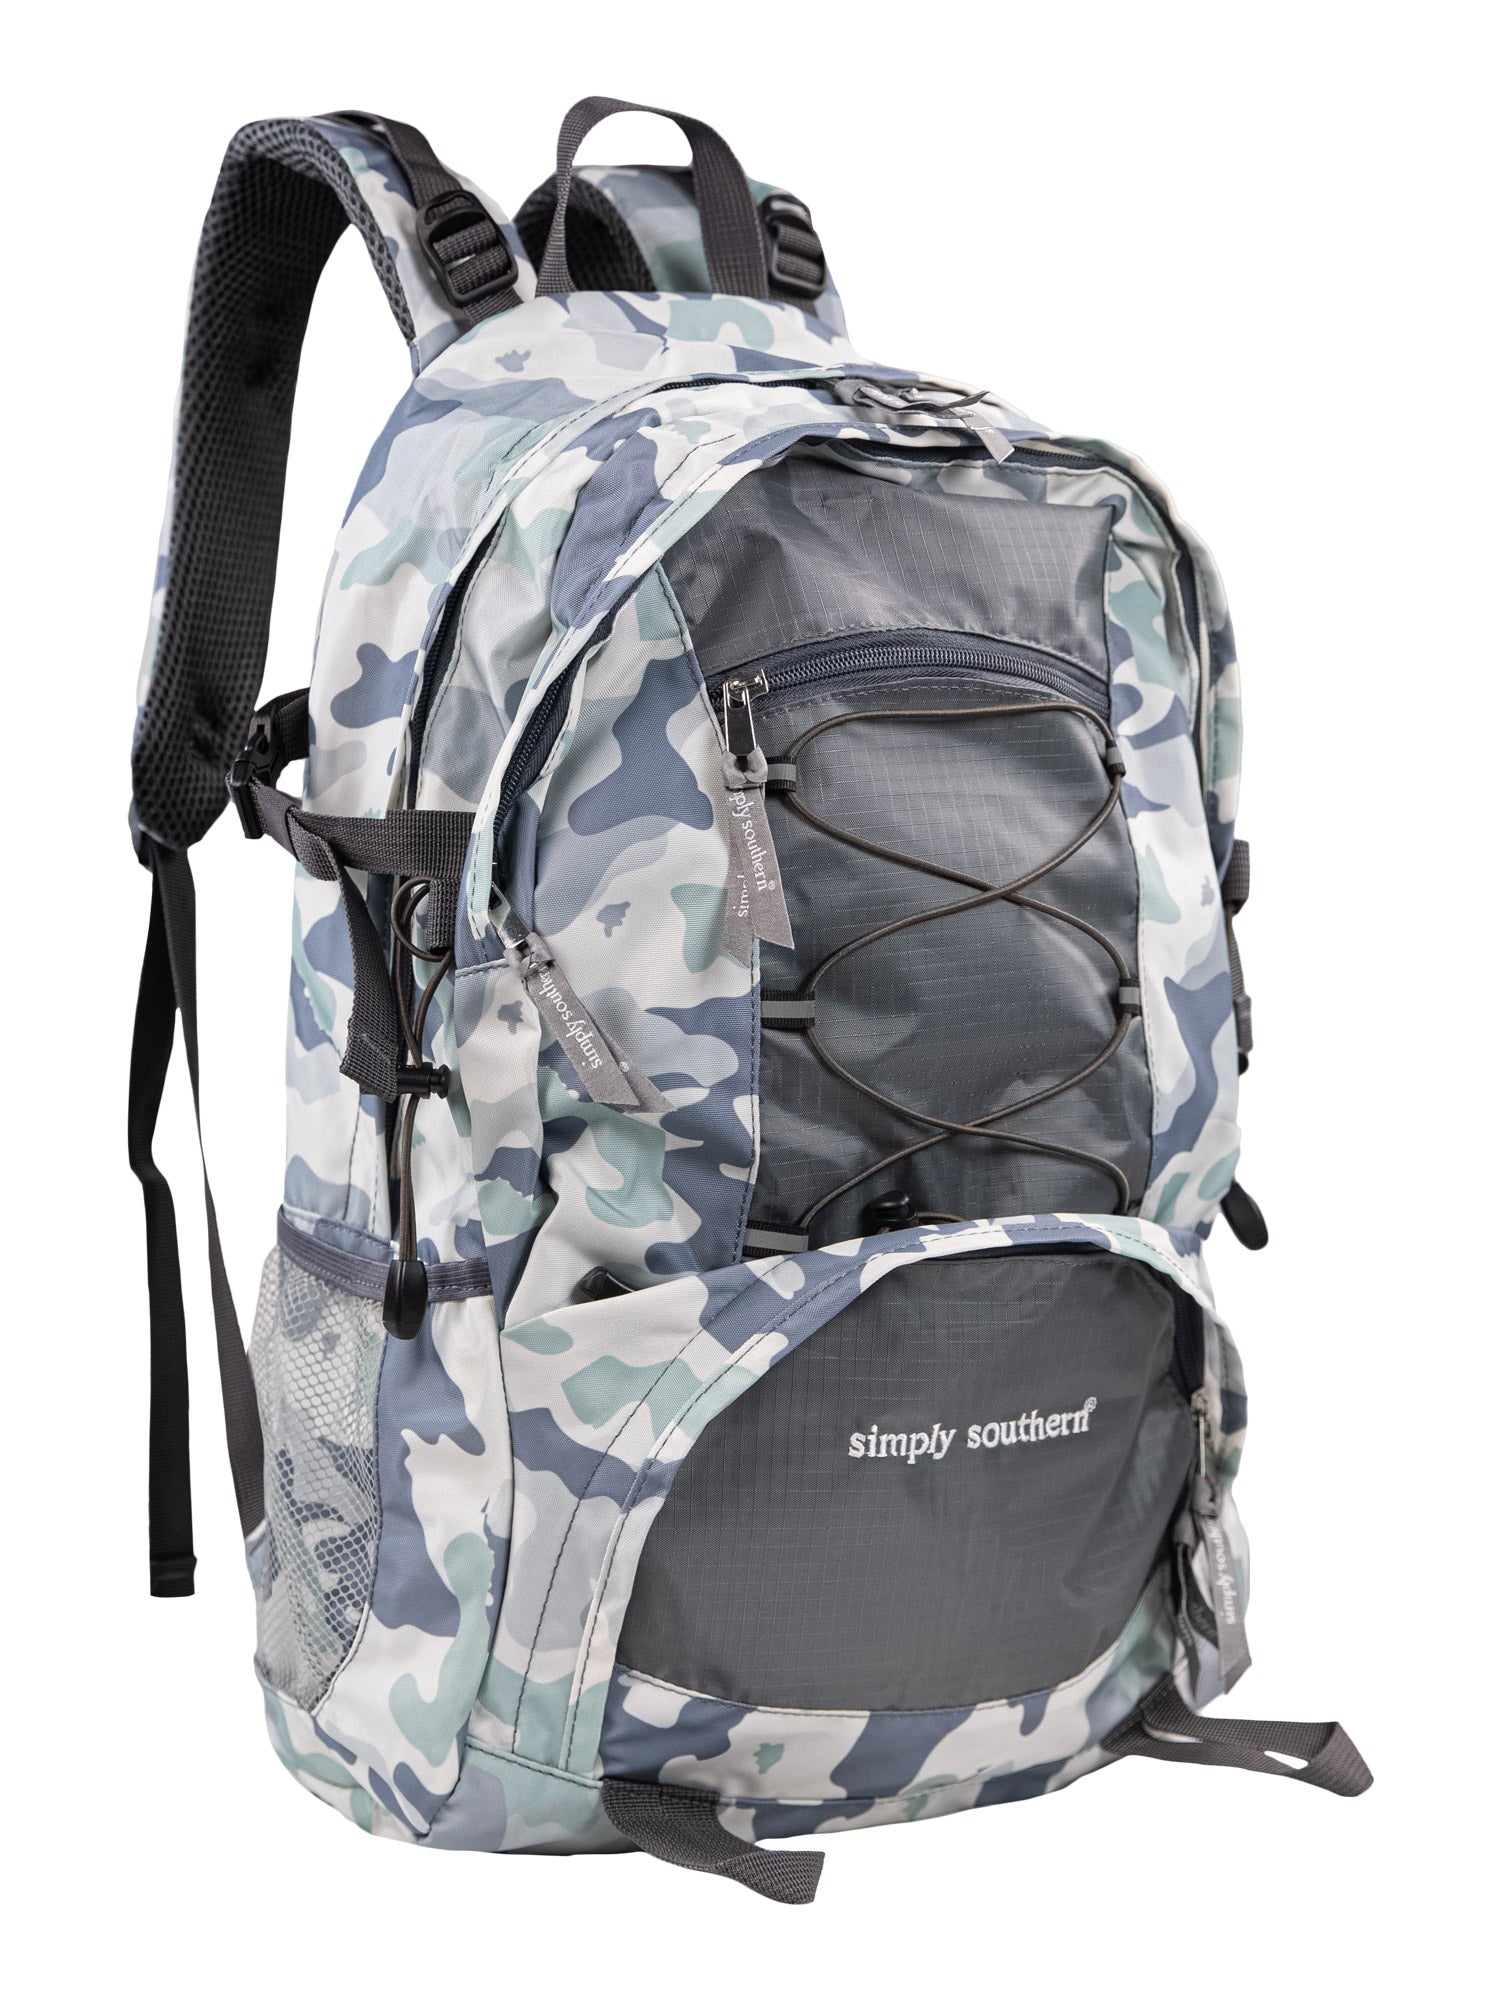 Simply Southern 0222-BACKPACK-CAMO Backpack in Blue Camo Front View